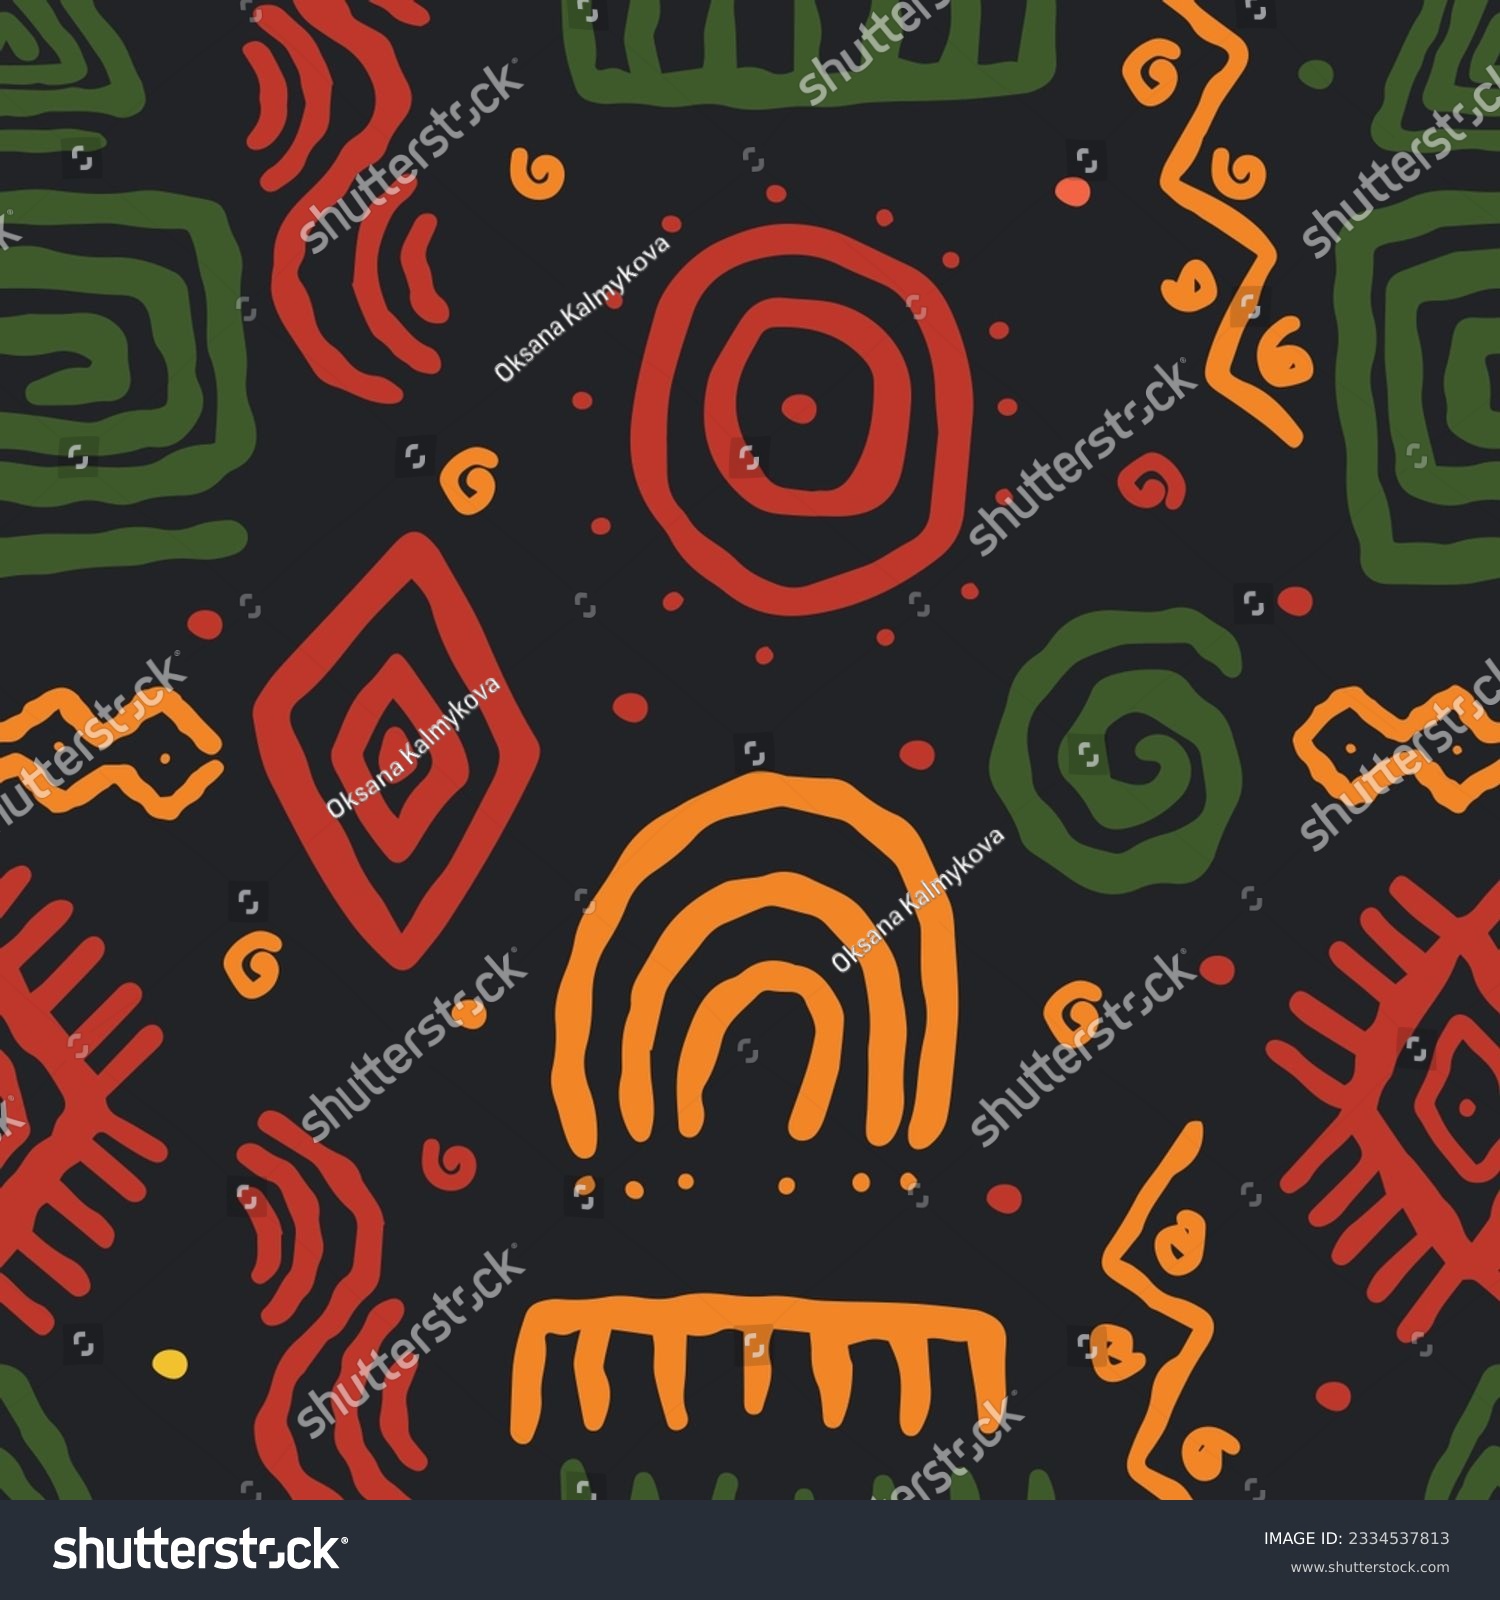 SVG of African geometric print. African pattern. Abstract african art style seamless pattern. Hand drawn tribal decoration background with boho doodle shapes and ethnic symbols.  svg